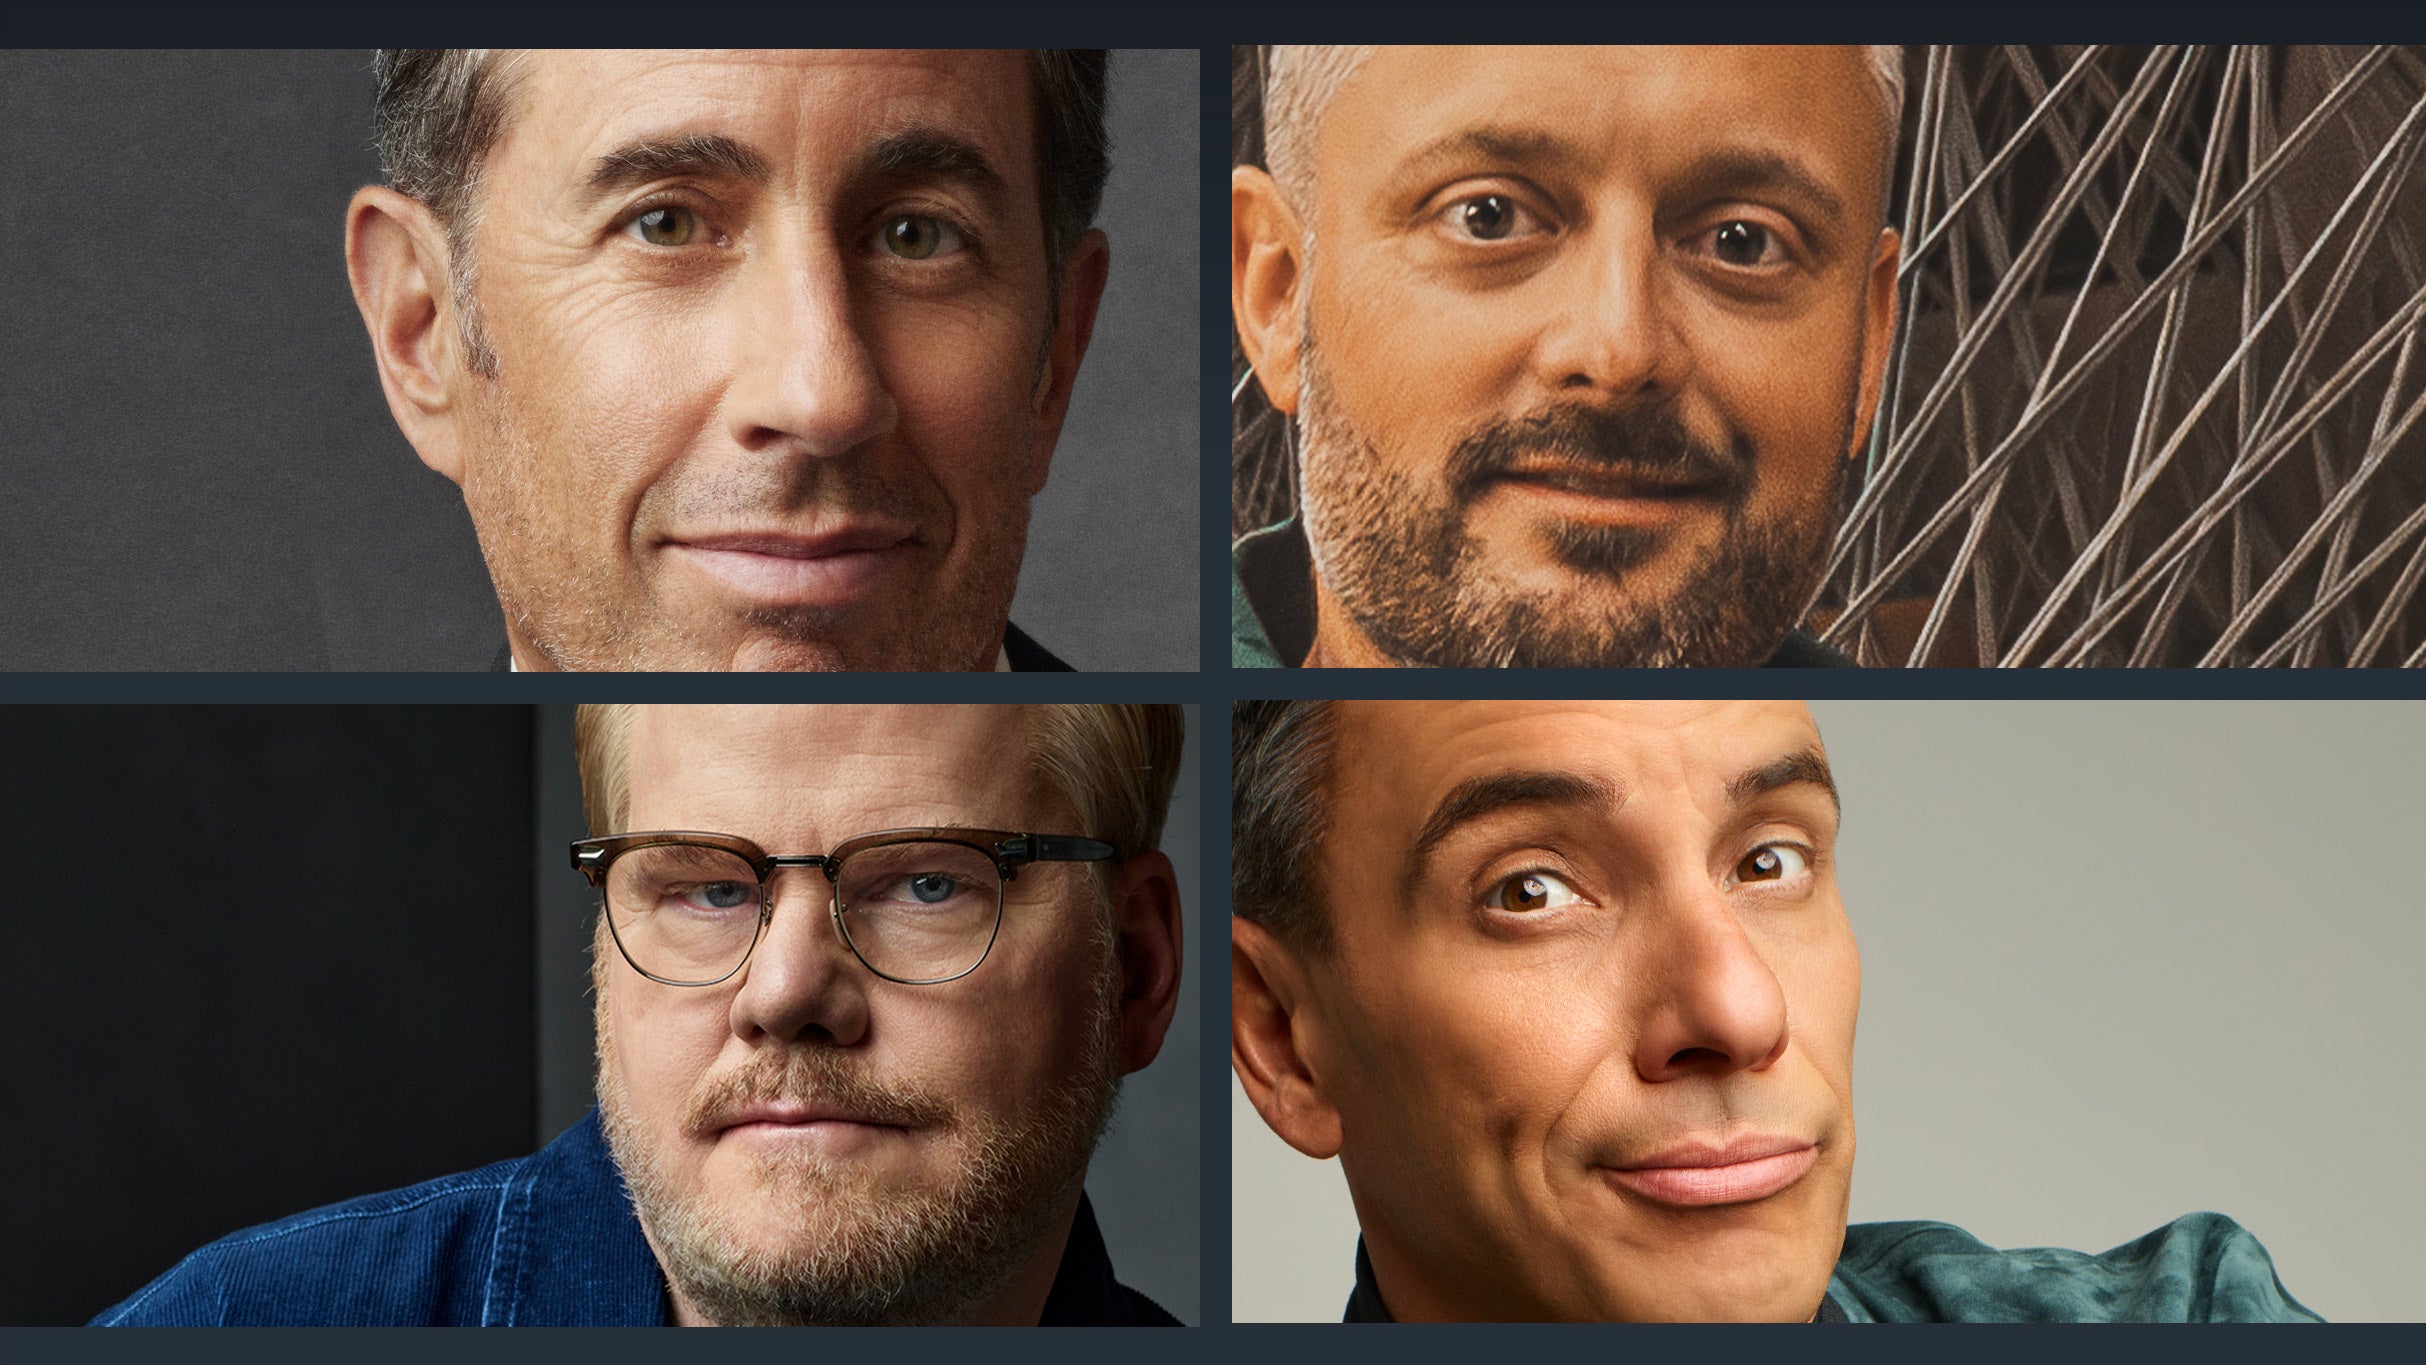 Netflix Is A Joke Presents: Seinfeld, Gaffigan, Bargatze & Maniscalco in Hollywood promo photo for American Express® Access presale offer code